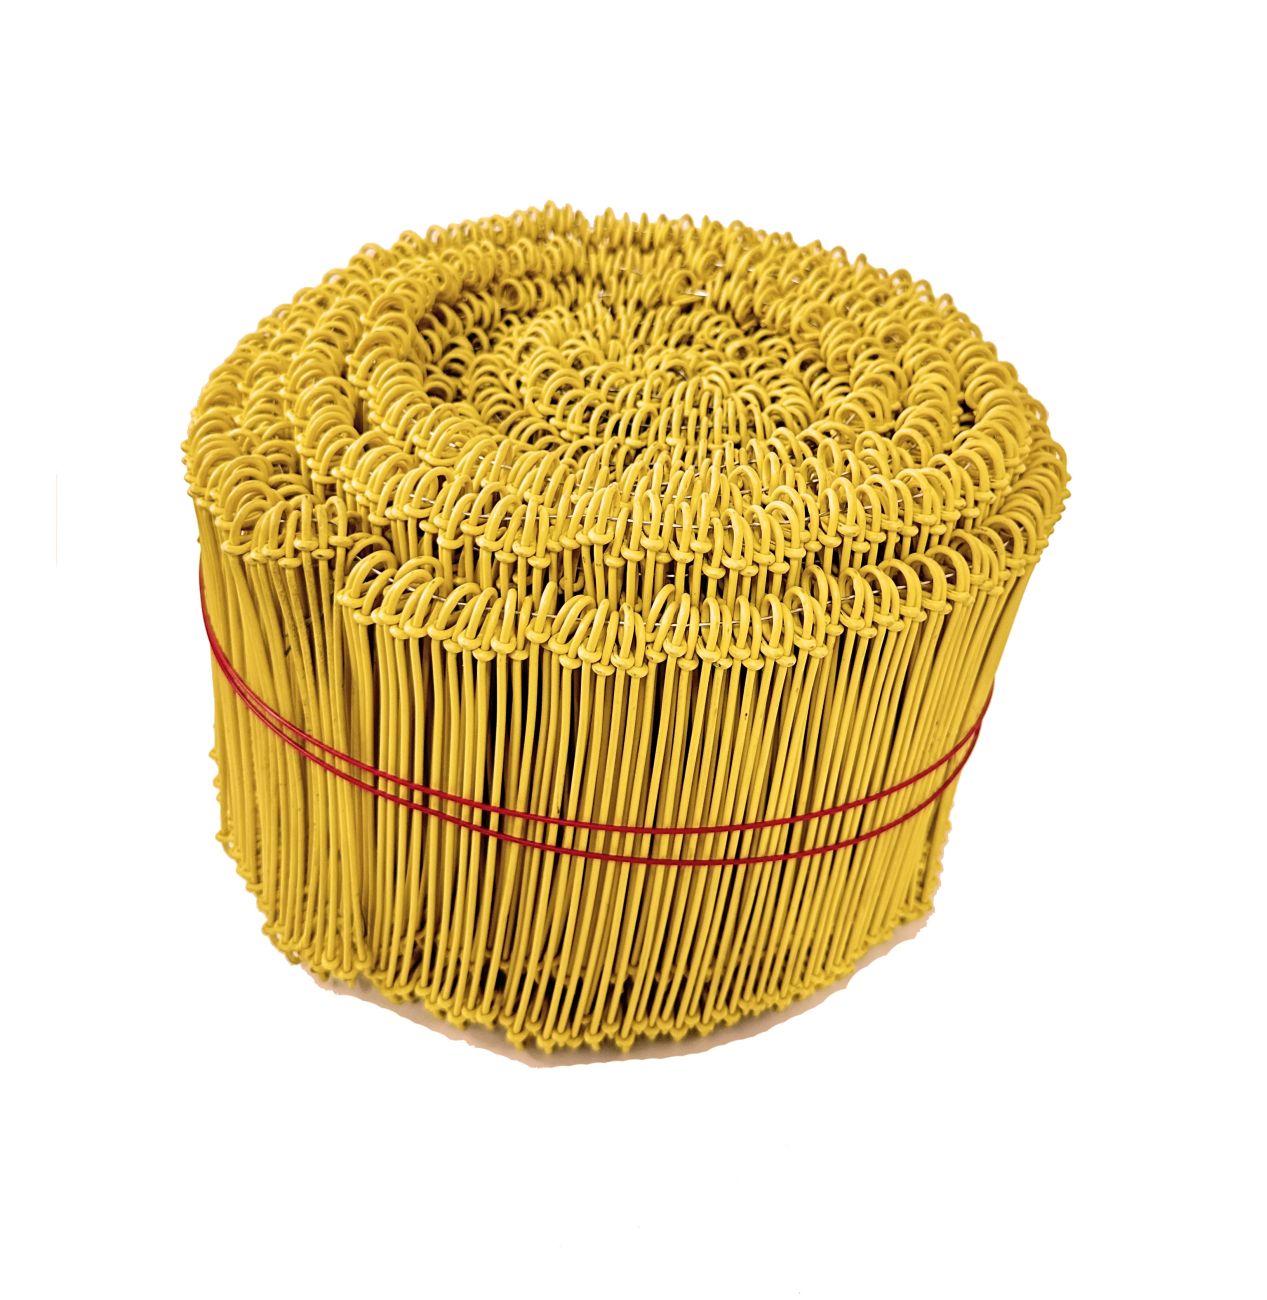 23-269 6in. 16 Gauge 1000 Pc. Yellow PVC Coated Double Loop Reinforcement Cable Rebar Wire Ties